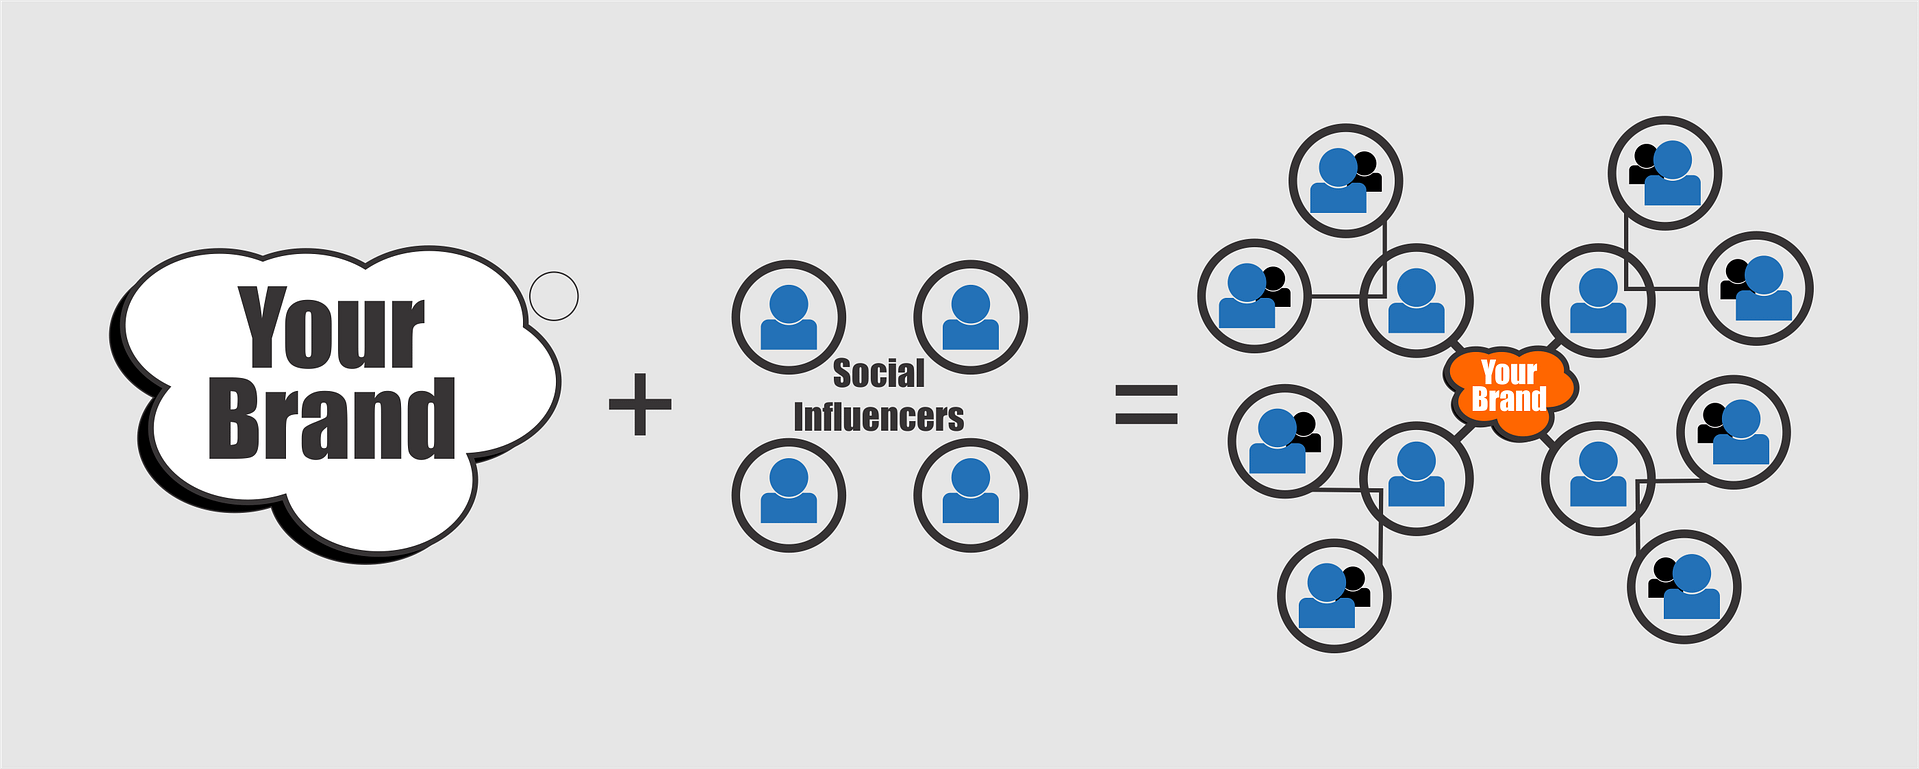 Influencers Have Real Power